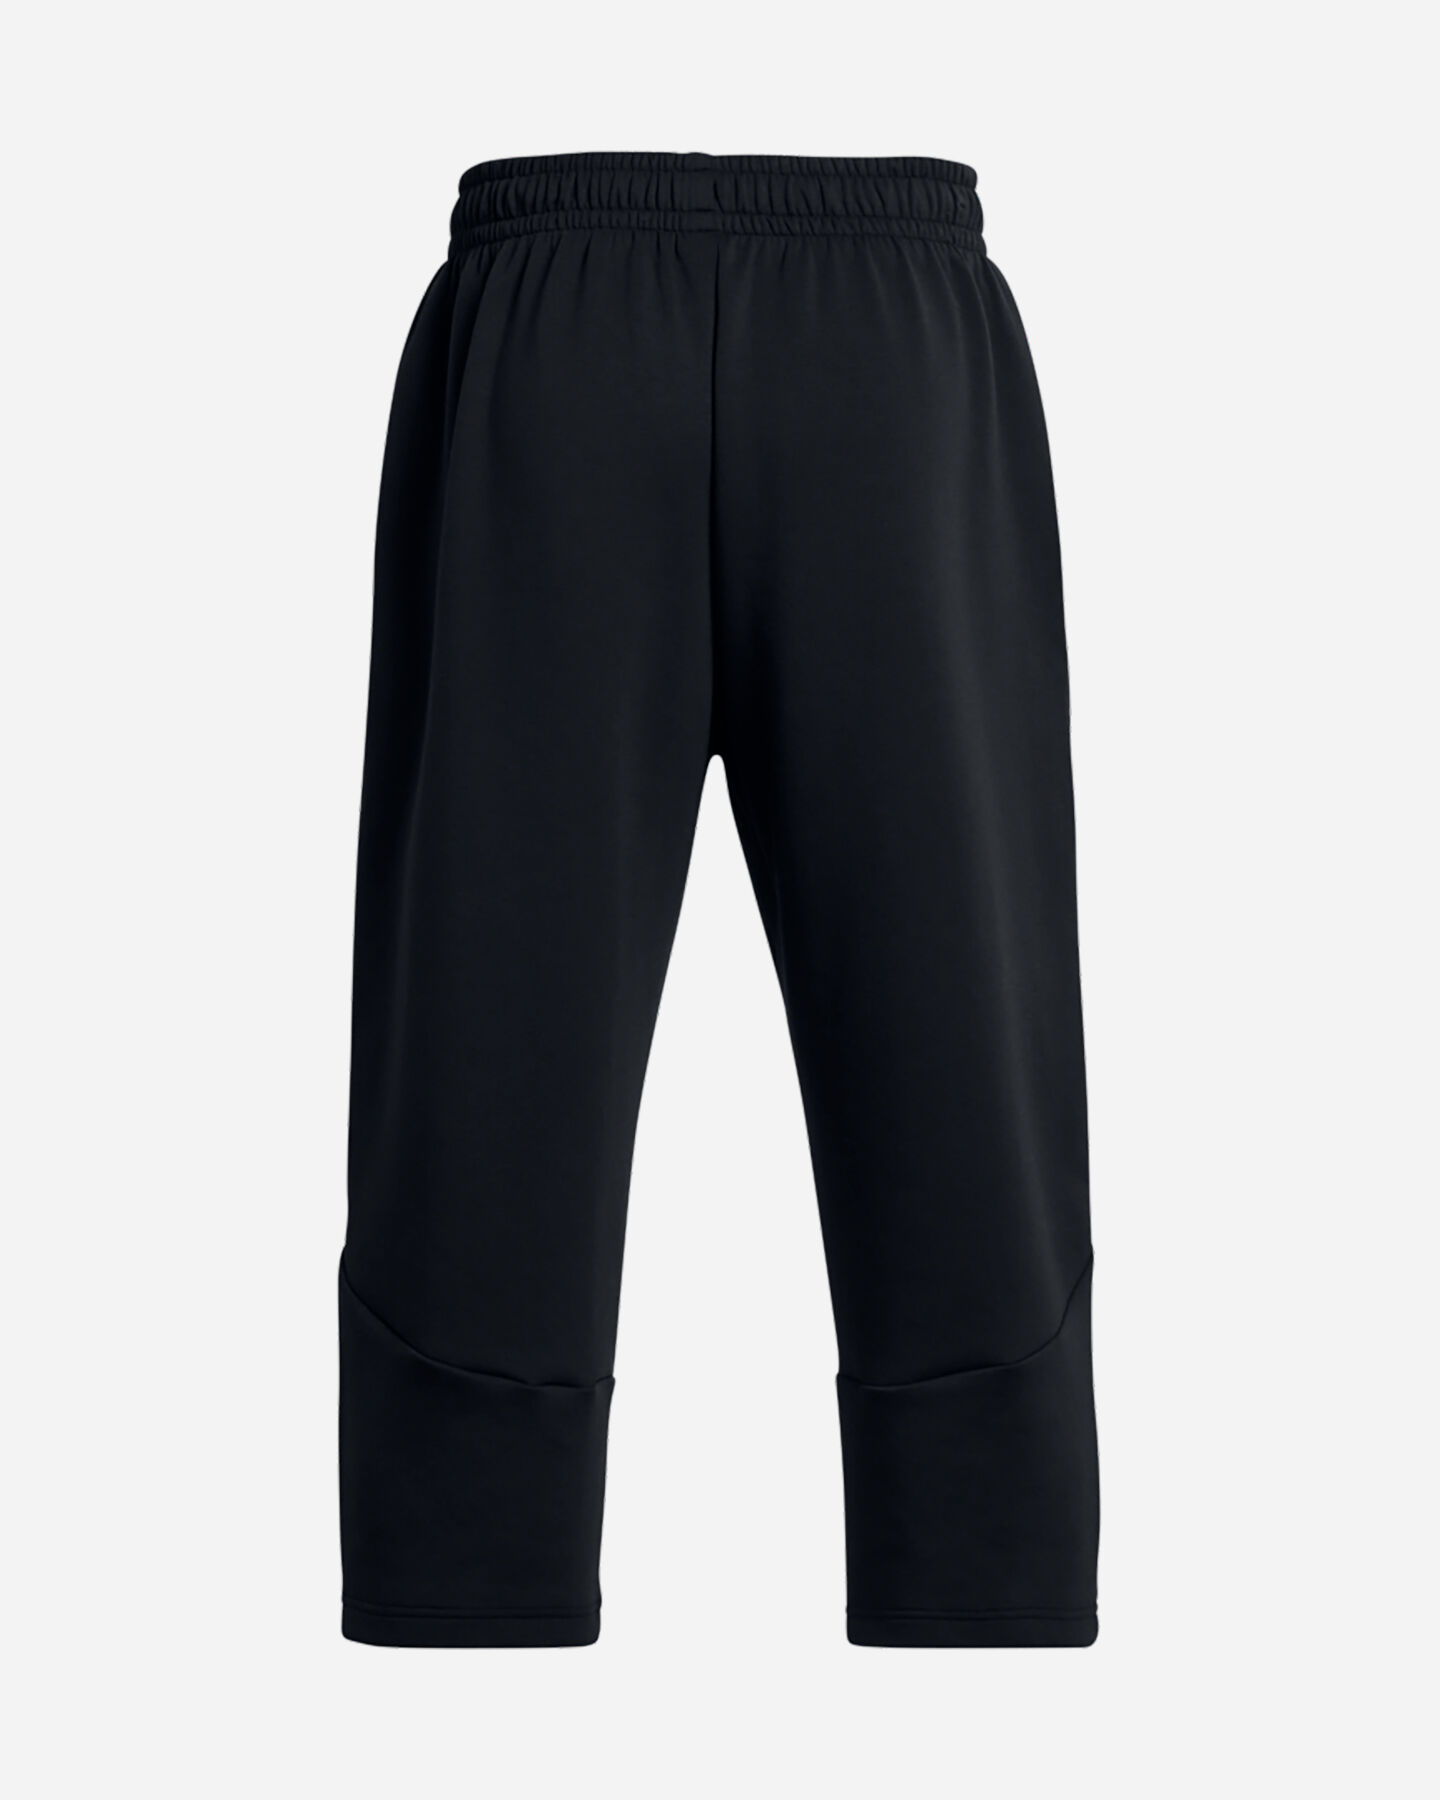  Pantalone UNDER ARMOUR UNSTOPPABLE BAGGY CROP M S5642101|0001|SM scatto 1